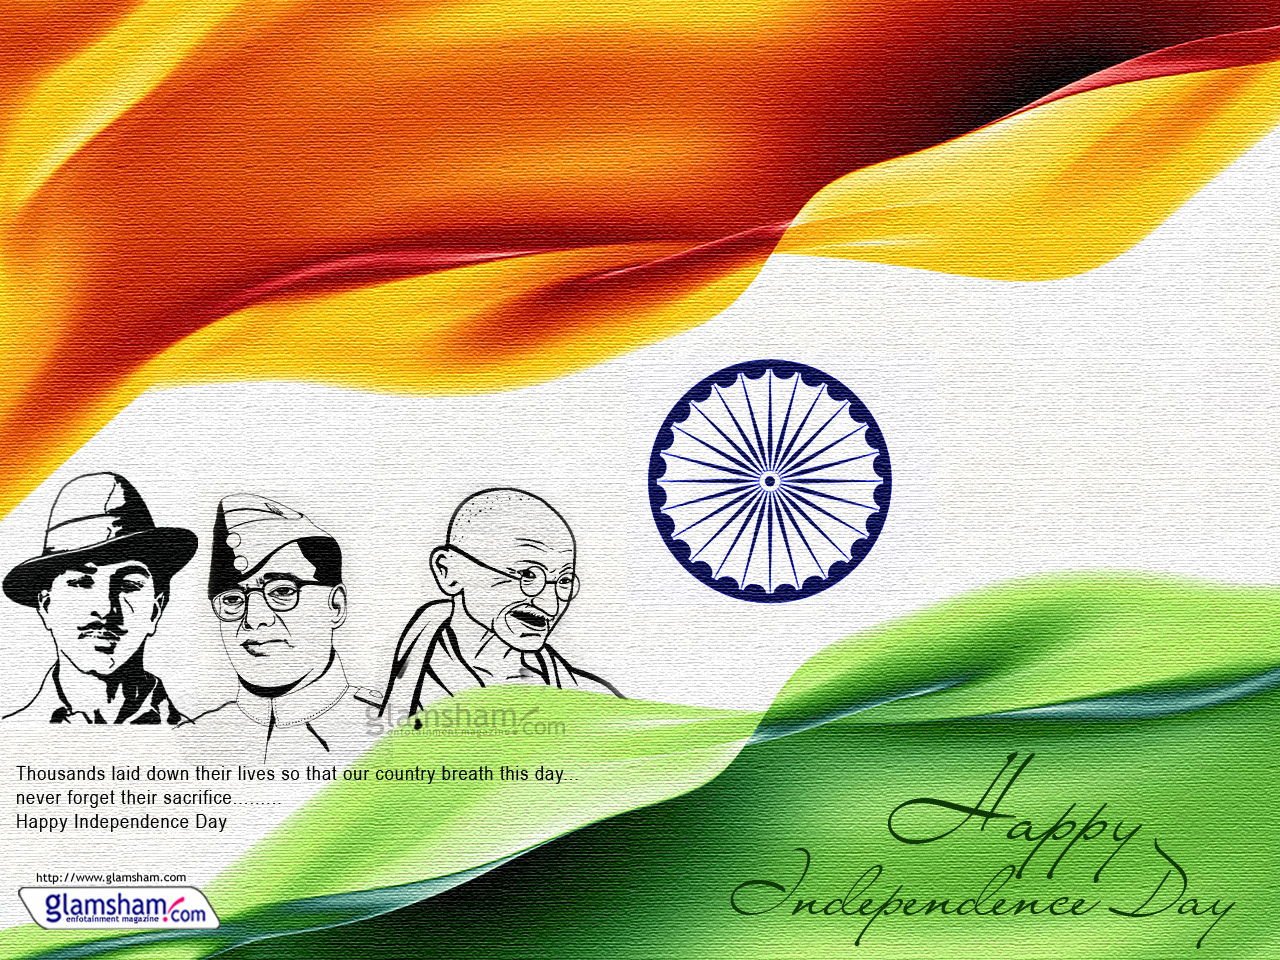 15 August 2014 Independence Day Wallpaper1 - Independence Day 15 August Poster - HD Wallpaper 